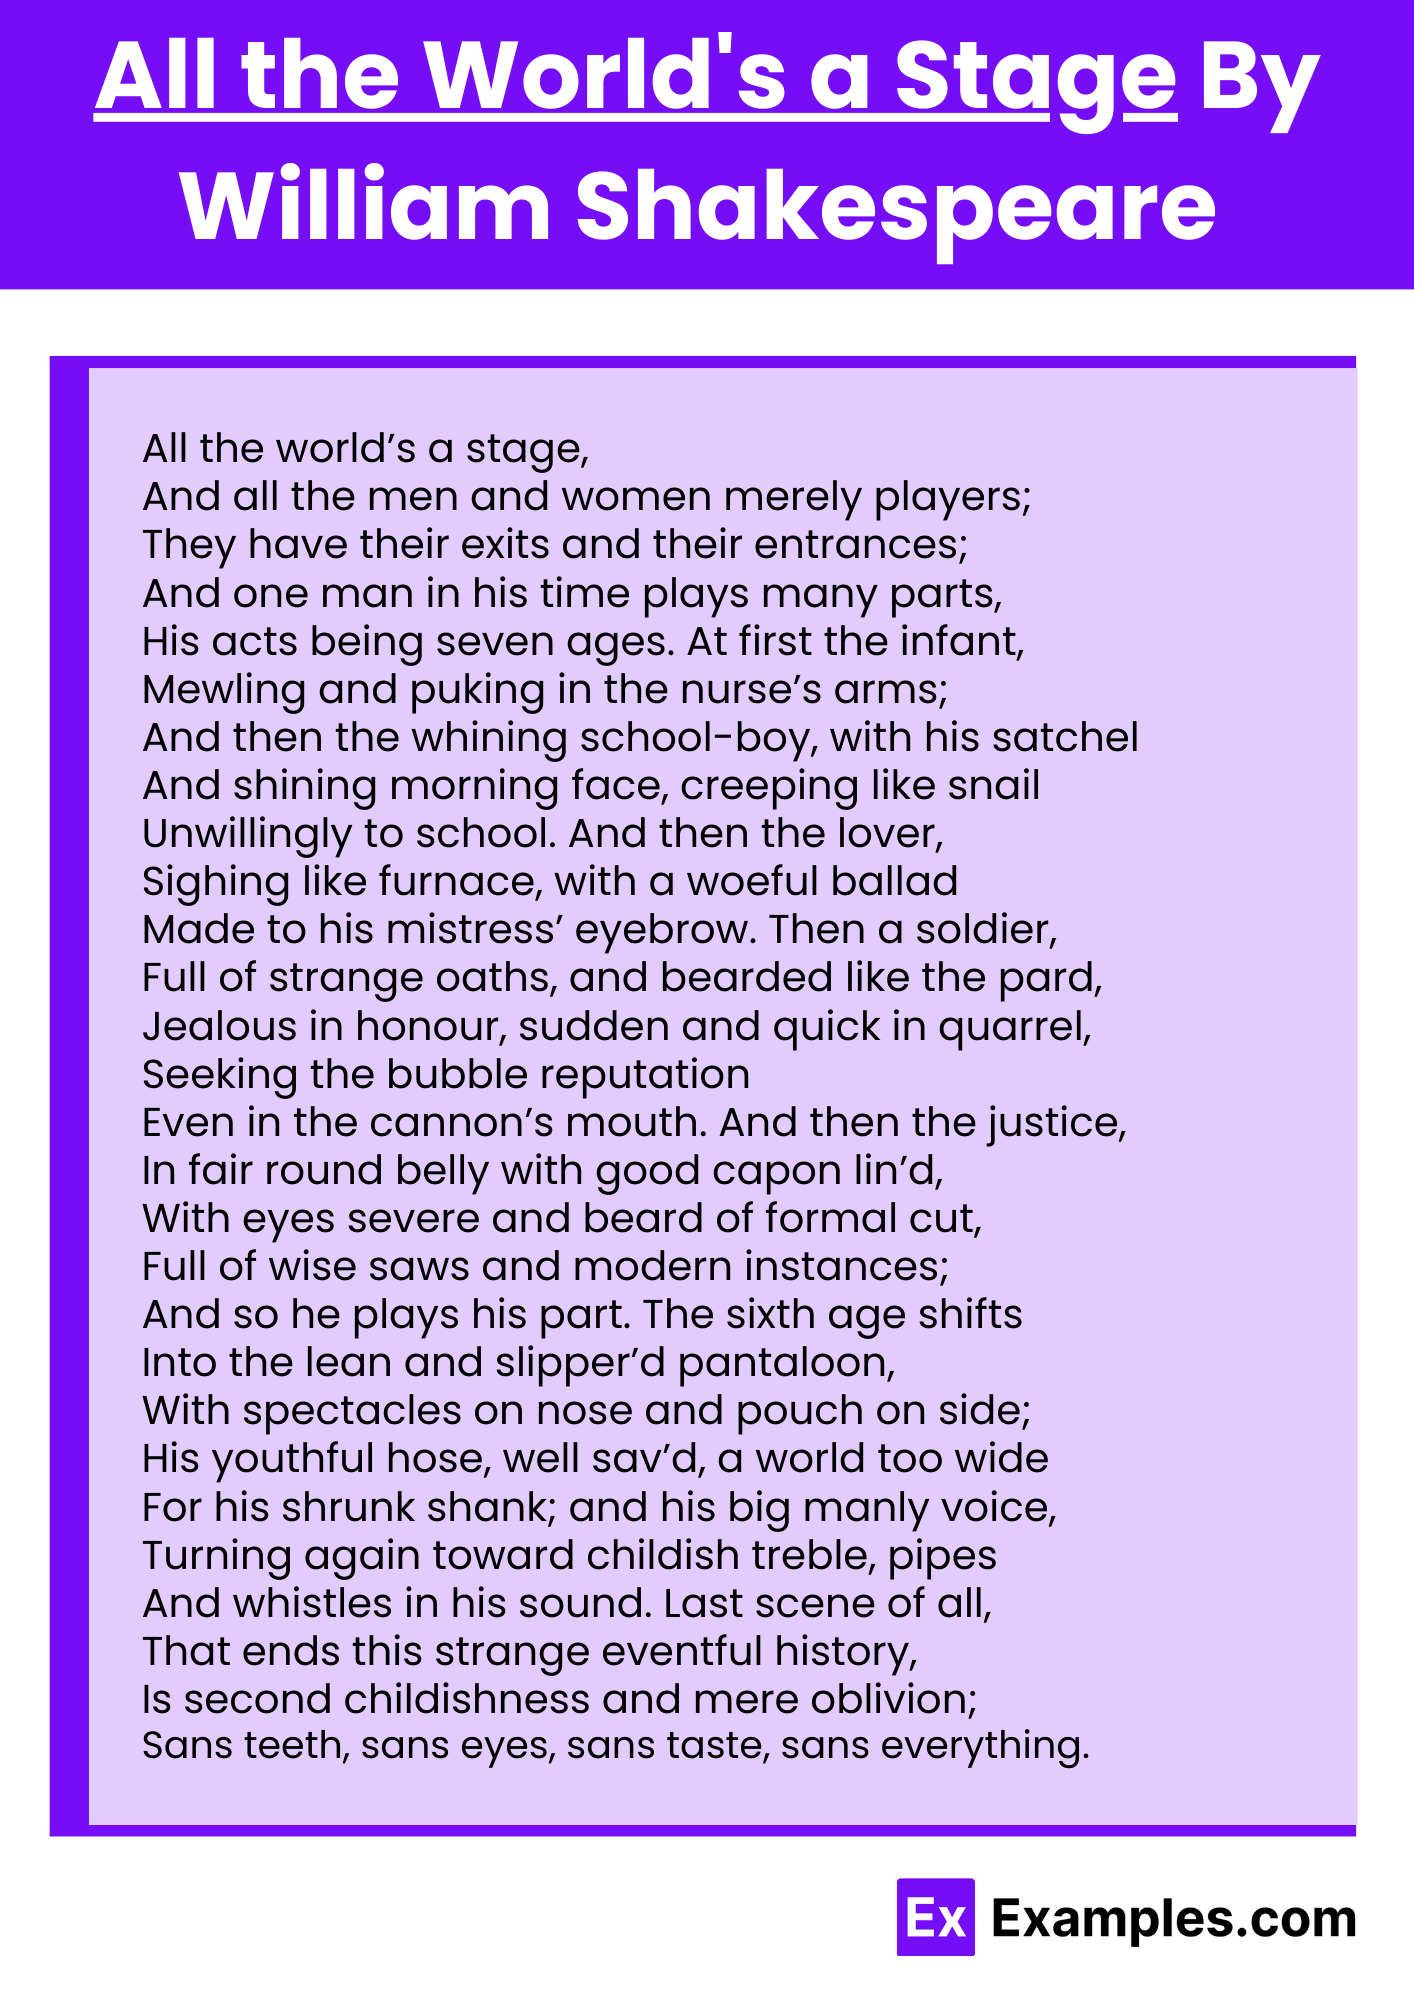 All the World's a Stage By William Shakespeare